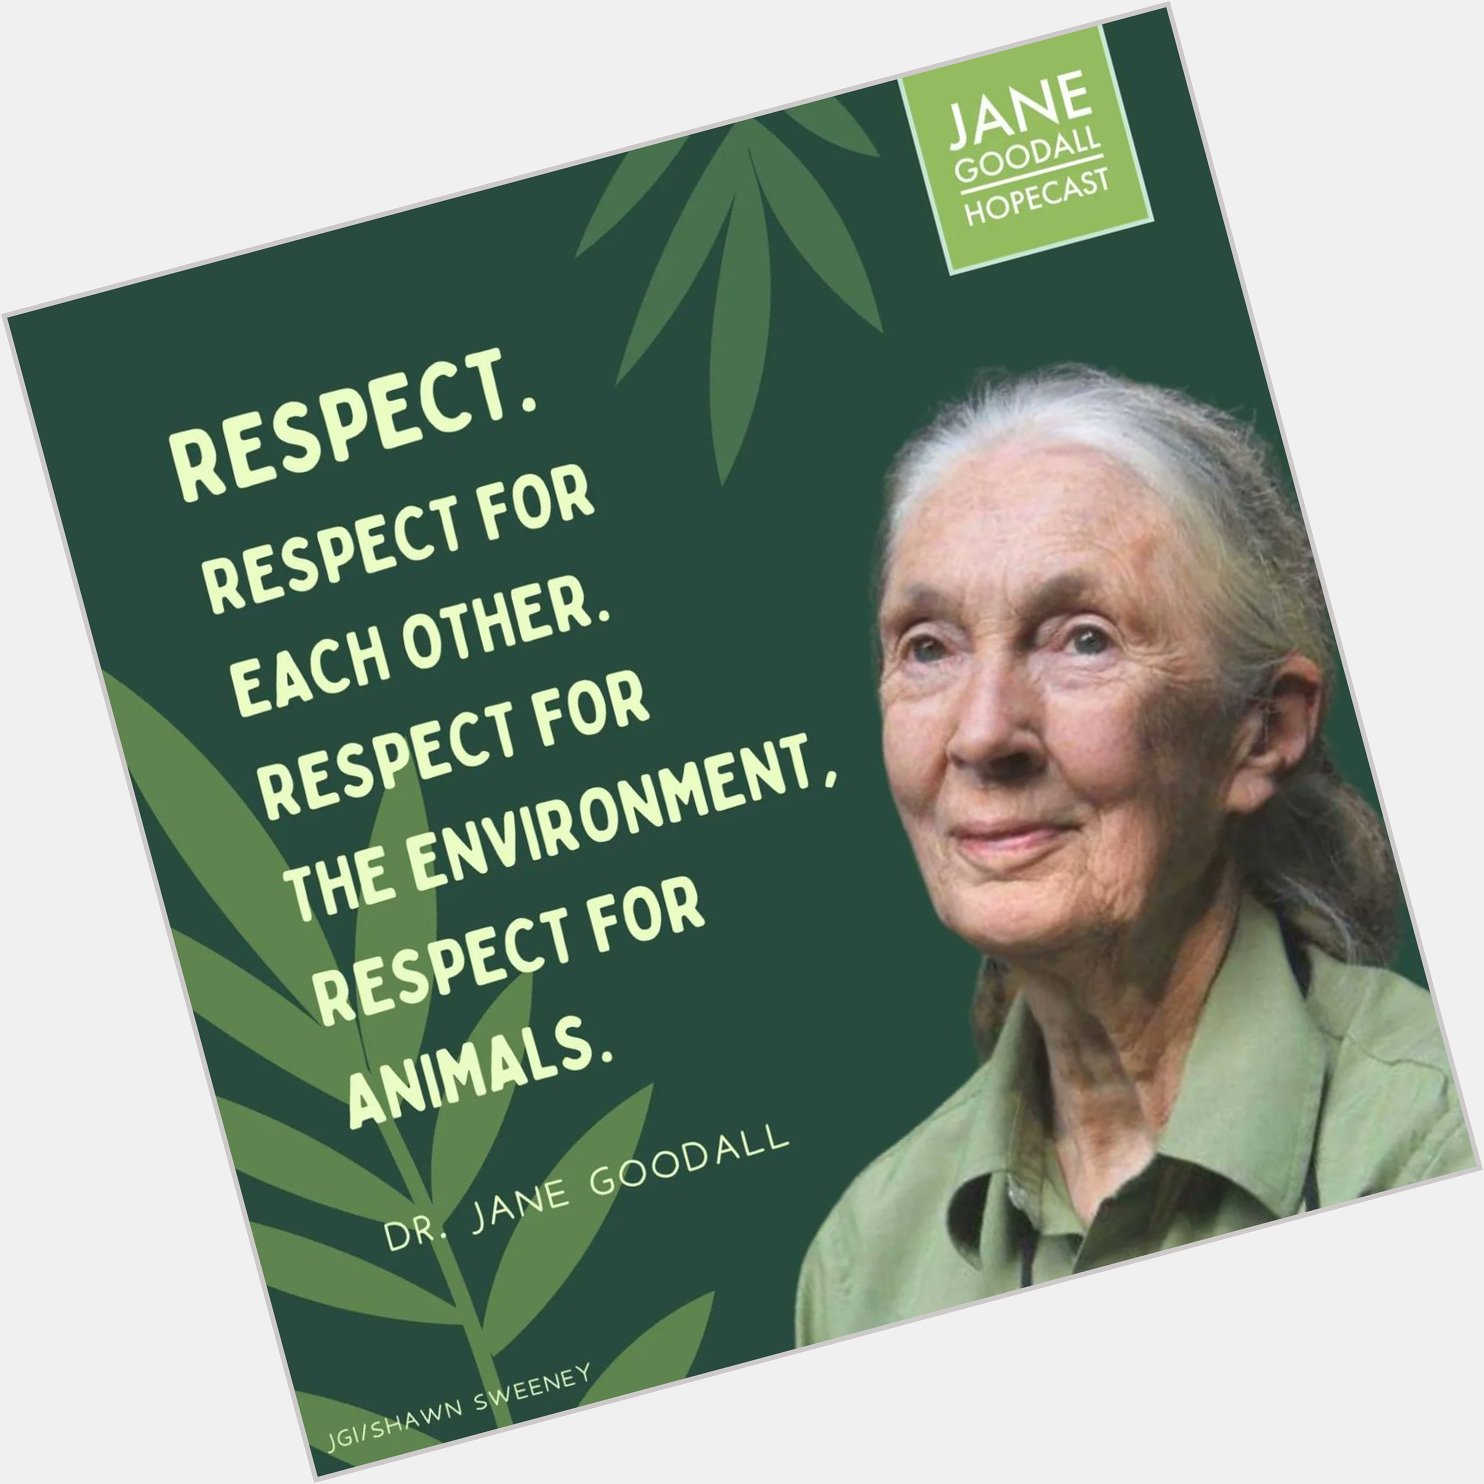 Happy Birthday, Dr. Jane Goodall! Thanks for all you do. 